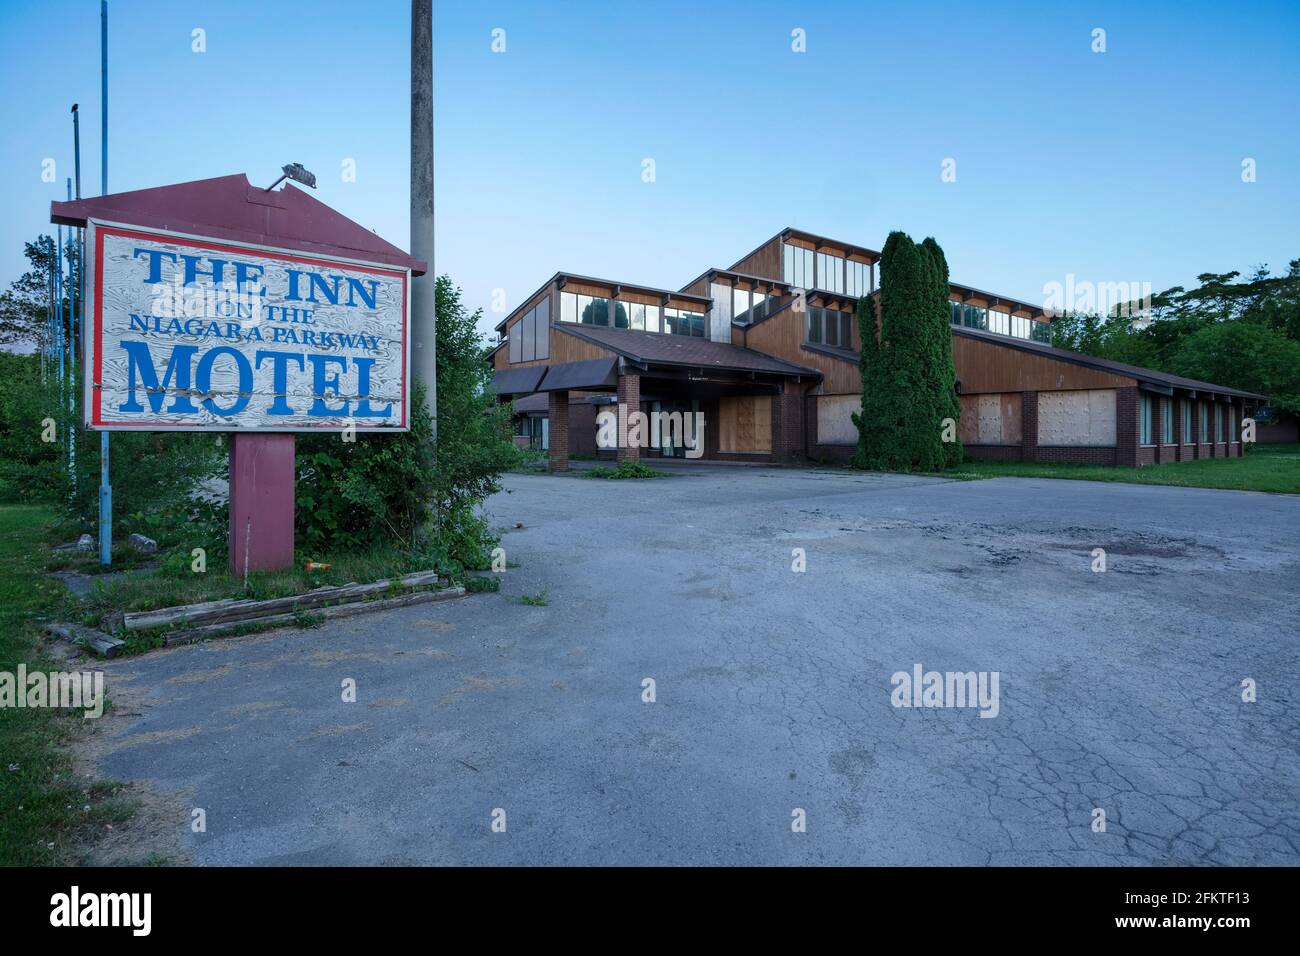 The abandoned Inn on the Niagara Parkway Motel in Chippawa, Niagara Falls, Ontario, Canada. This building has been demolished and no longer exists. Stock Photo